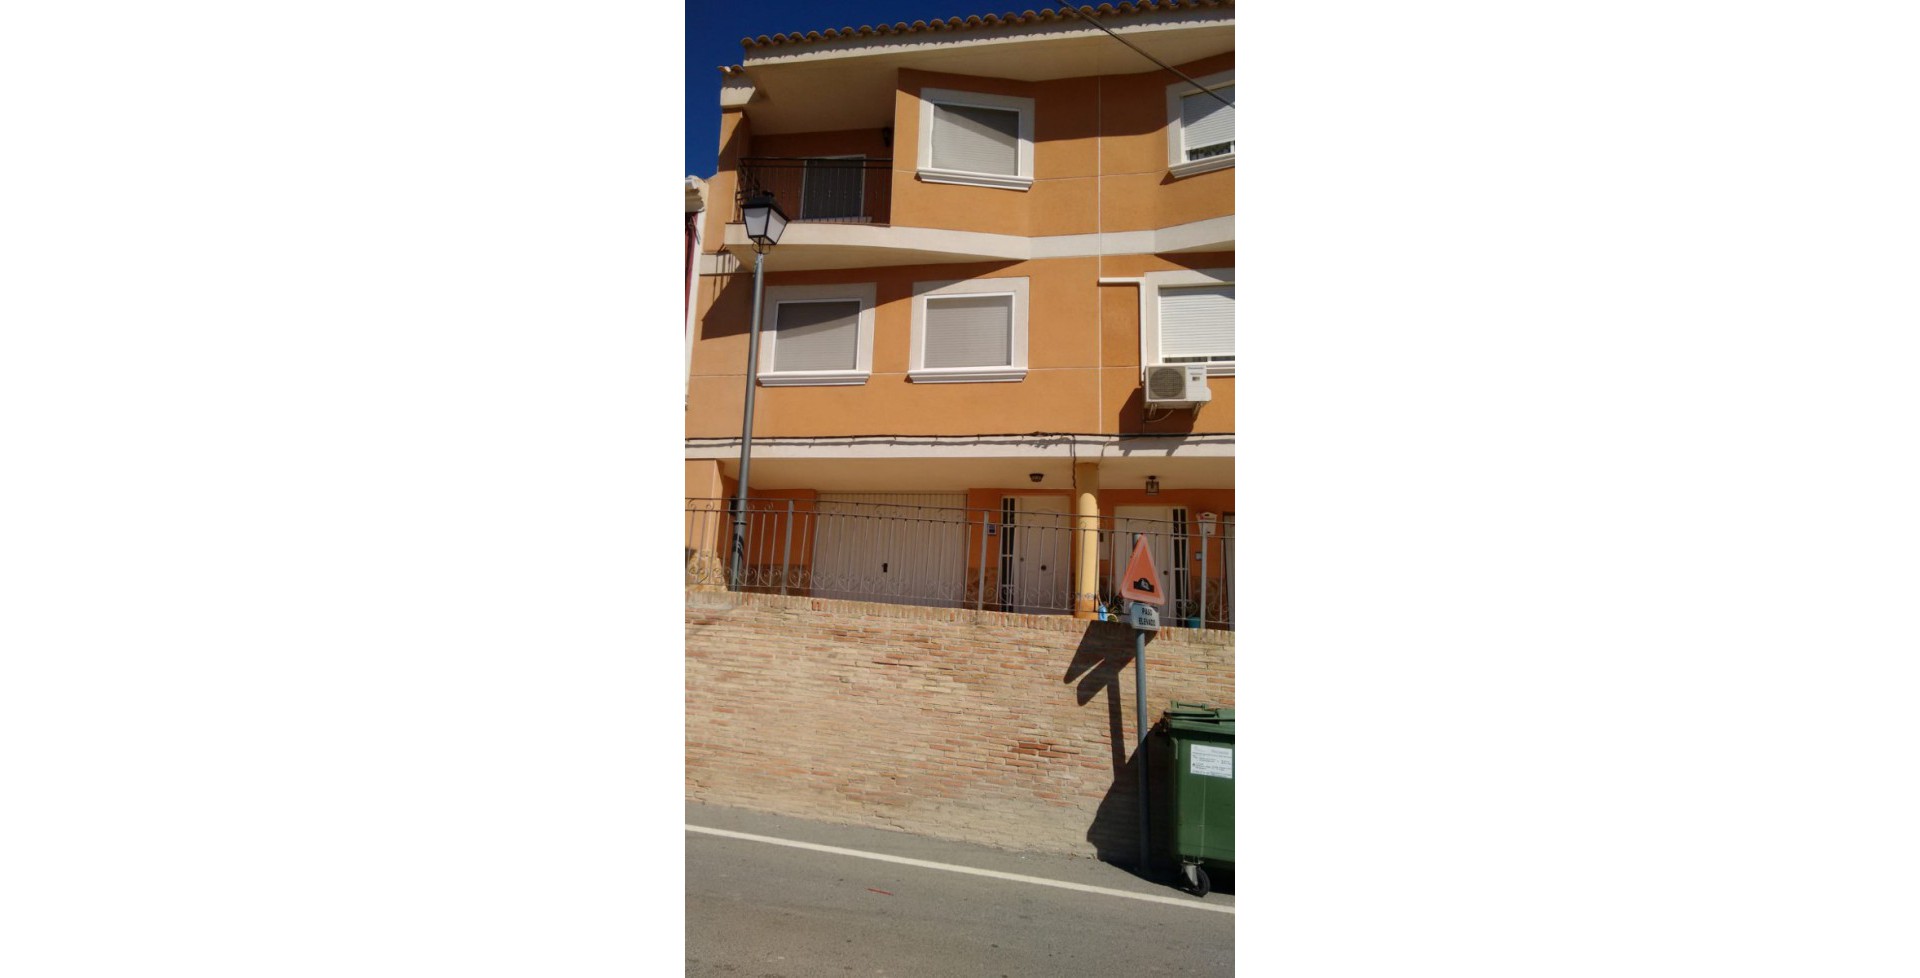 Quality Town House with great views, Ricote, Murcia, Spain